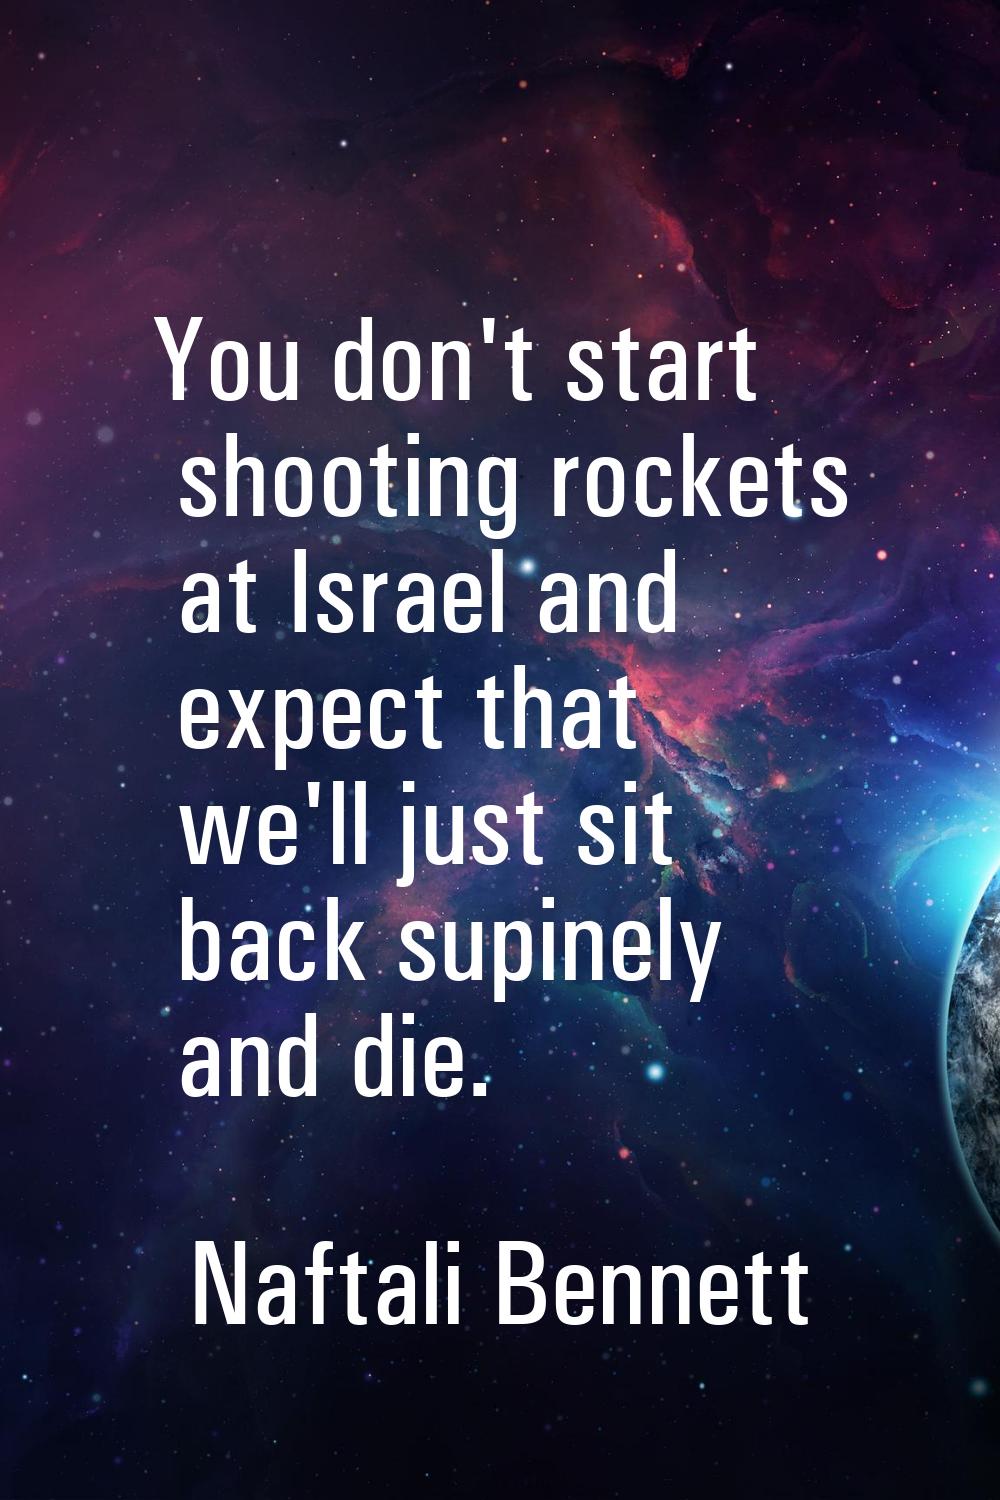 You don't start shooting rockets at Israel and expect that we'll just sit back supinely and die.